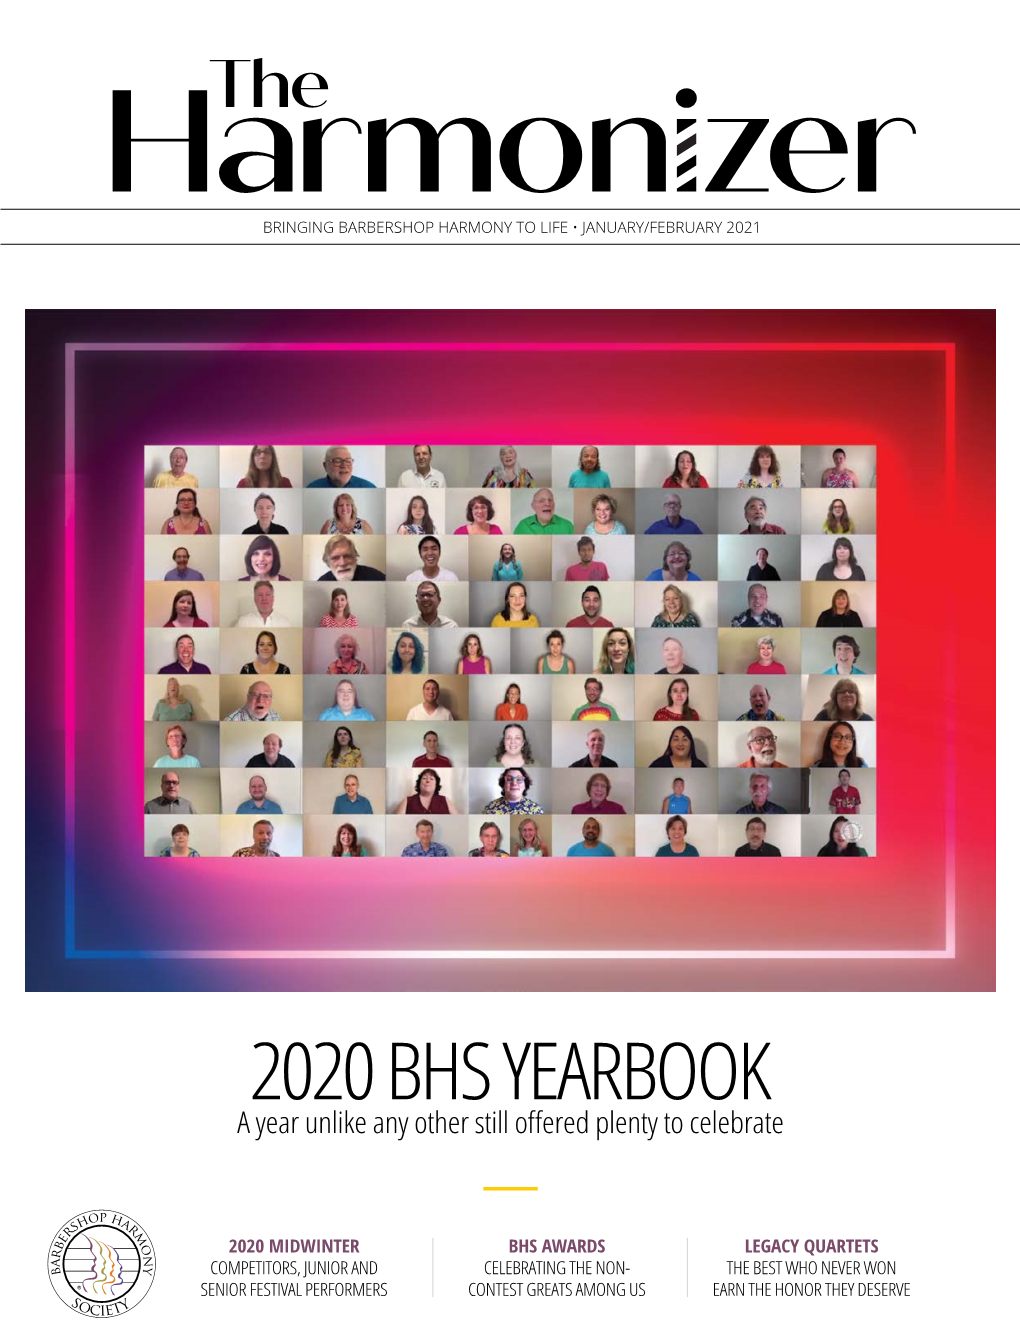 2020 BHS YEARBOOK a Year Unlike Any Other Still Offered Plenty to Celebrate